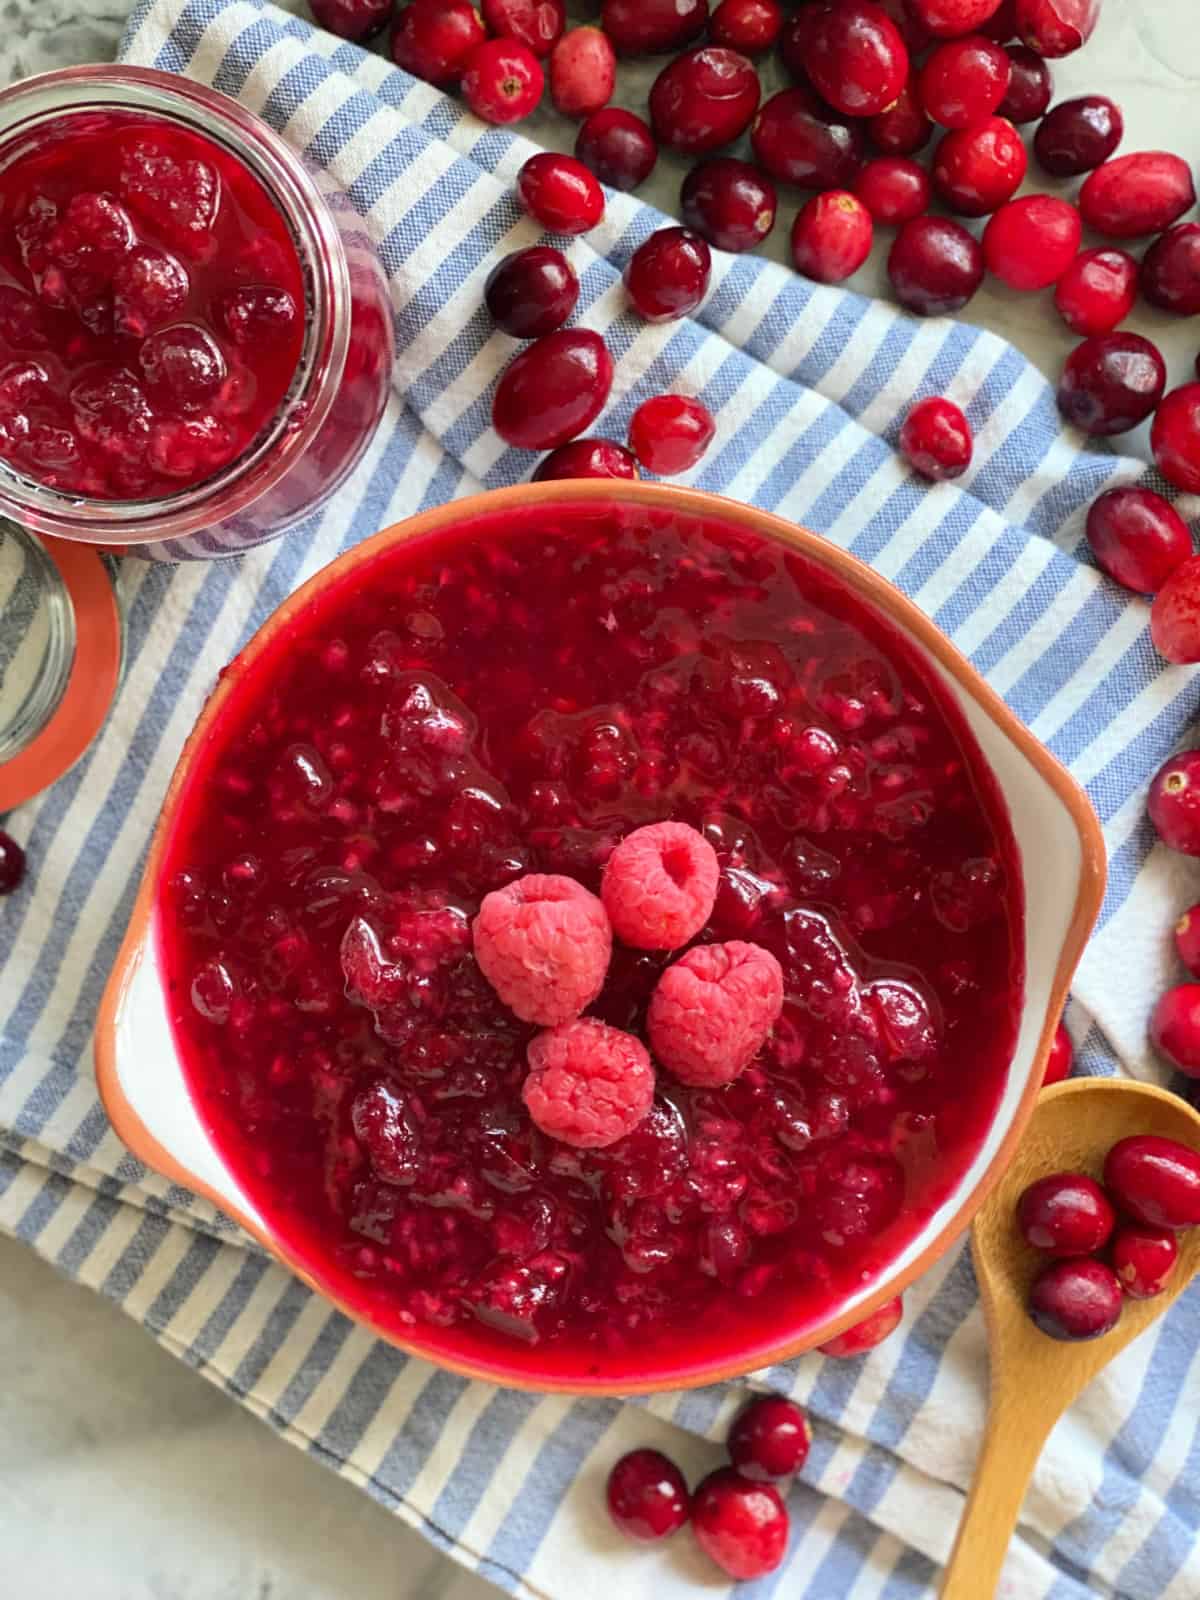 Cranberry raspberry sauce in a bowl on a blue and white stripped cloth with a jar of sauce, wooden spoon, and cranberries scattered in the background.